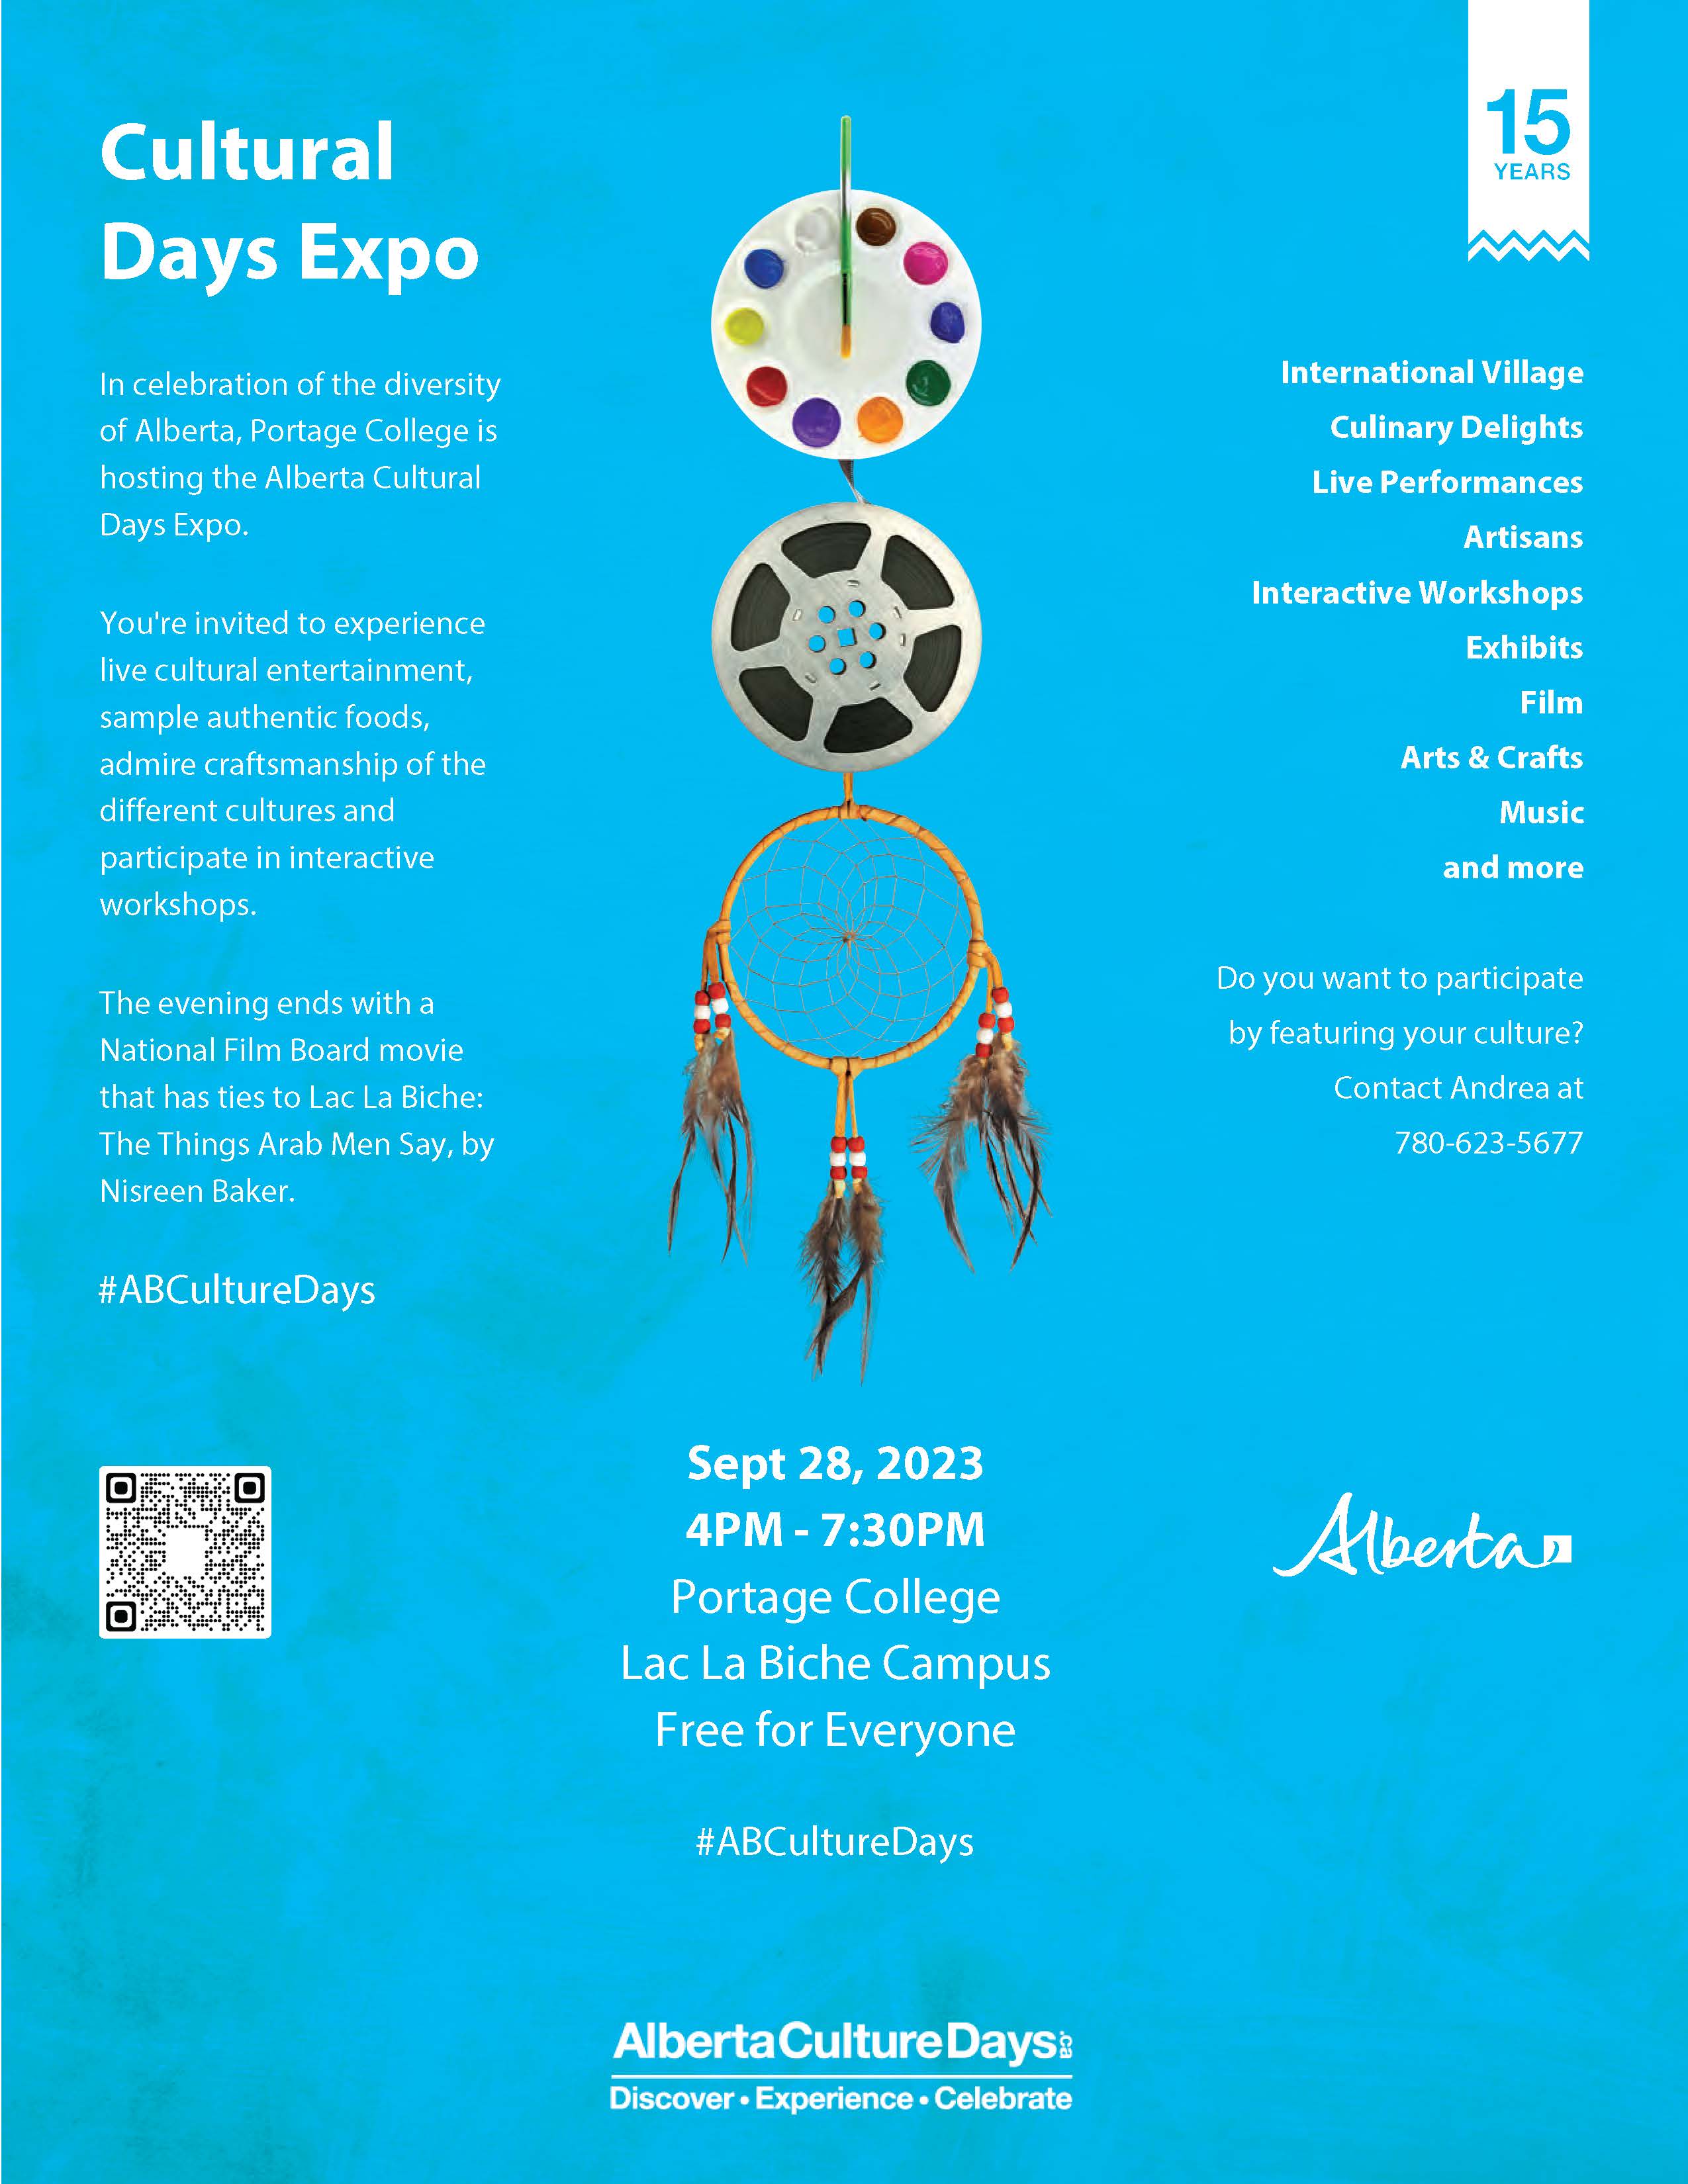 Cultural Days Expo